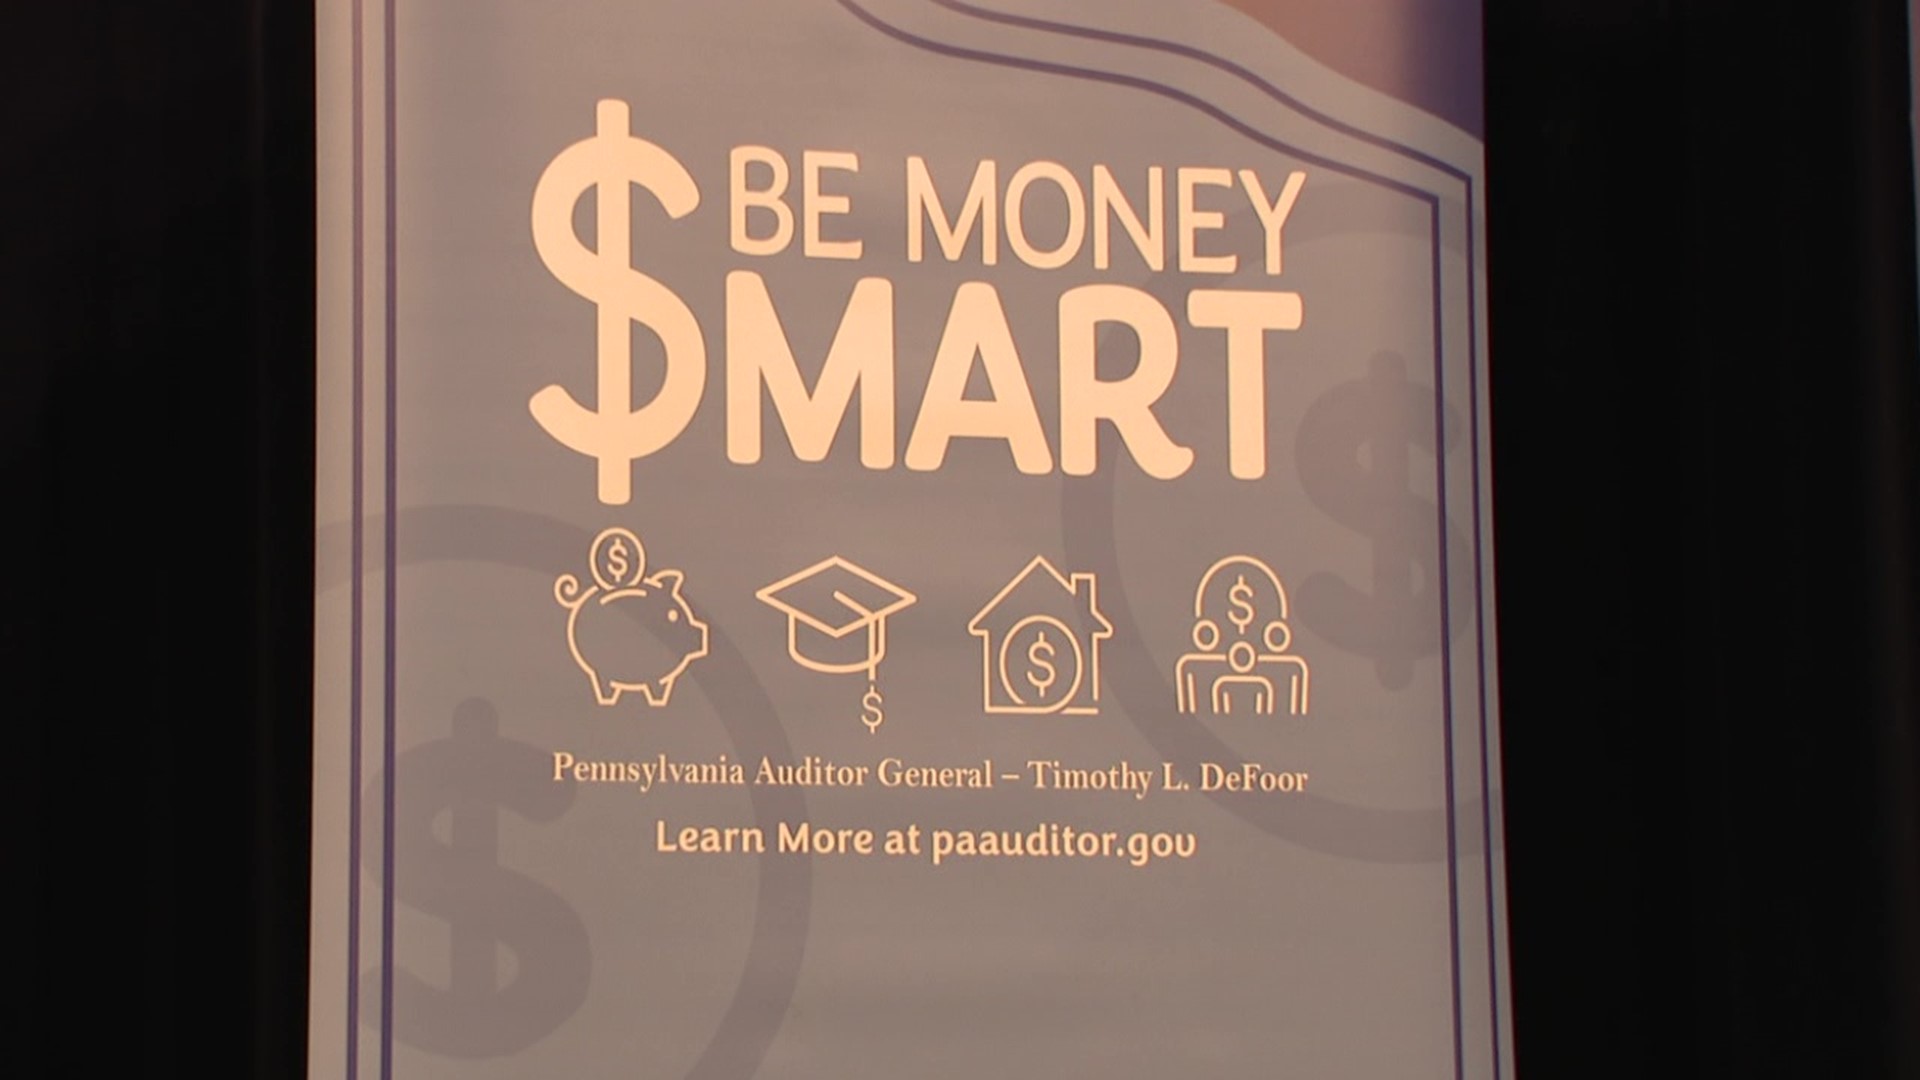 Officials hope to educate students on the importance of managing their money.